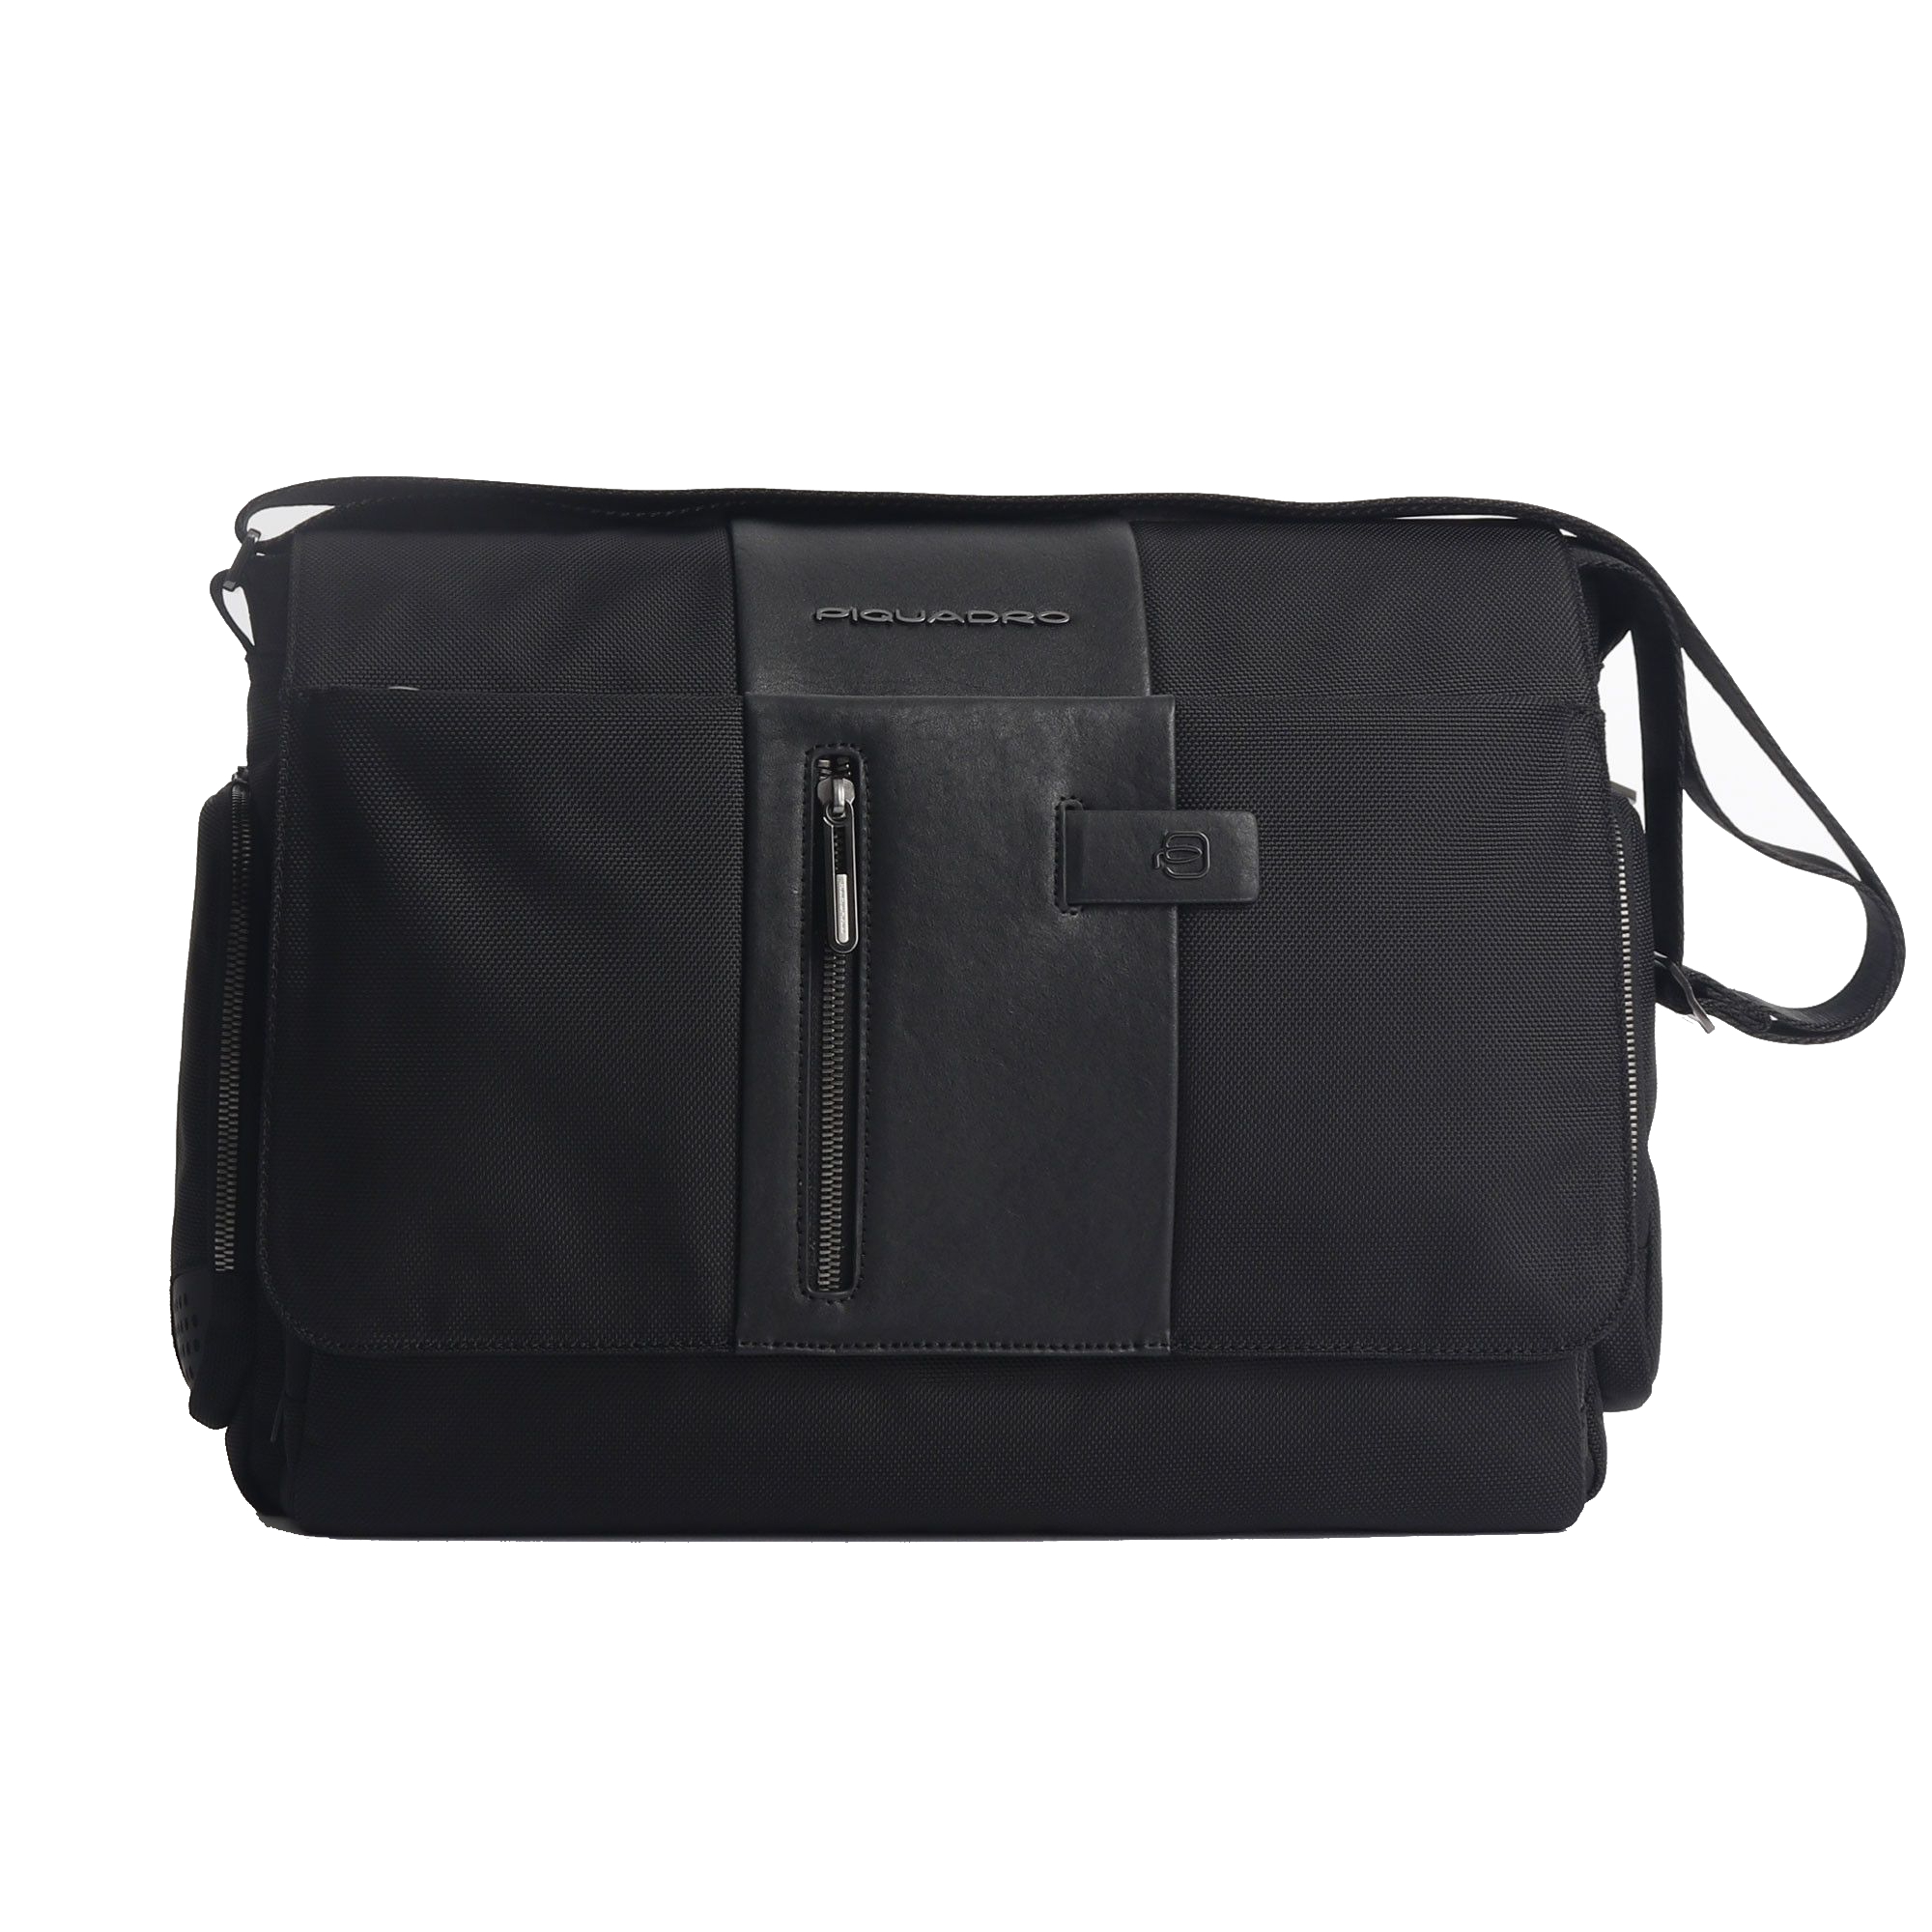 Piquadro Bag Blue Square, Ipad Holder Black - Buy At Outlet Prices!